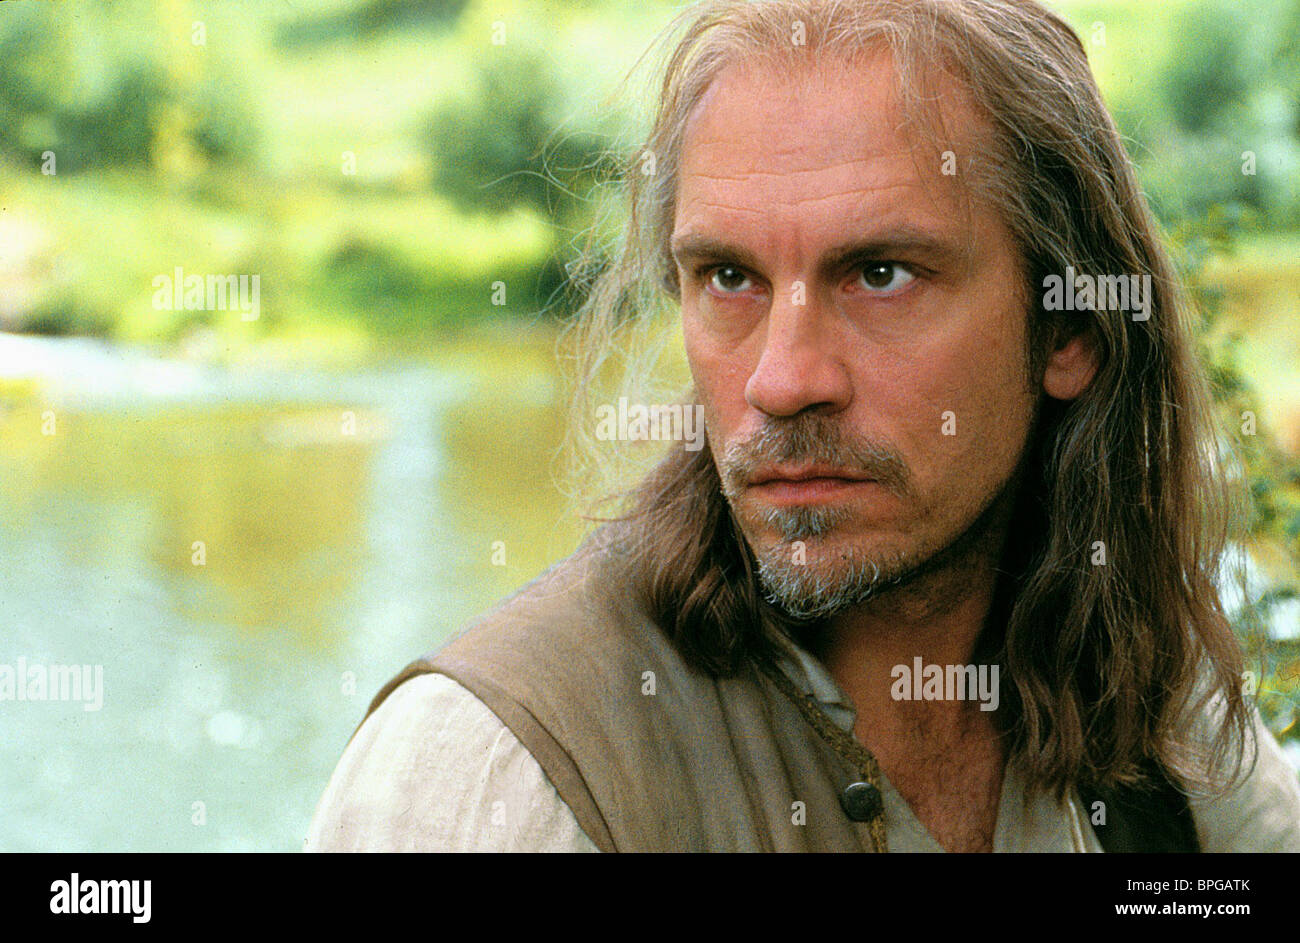 John Malkovich's blonde hair in "The Man in the Iron Mask" - wide 8